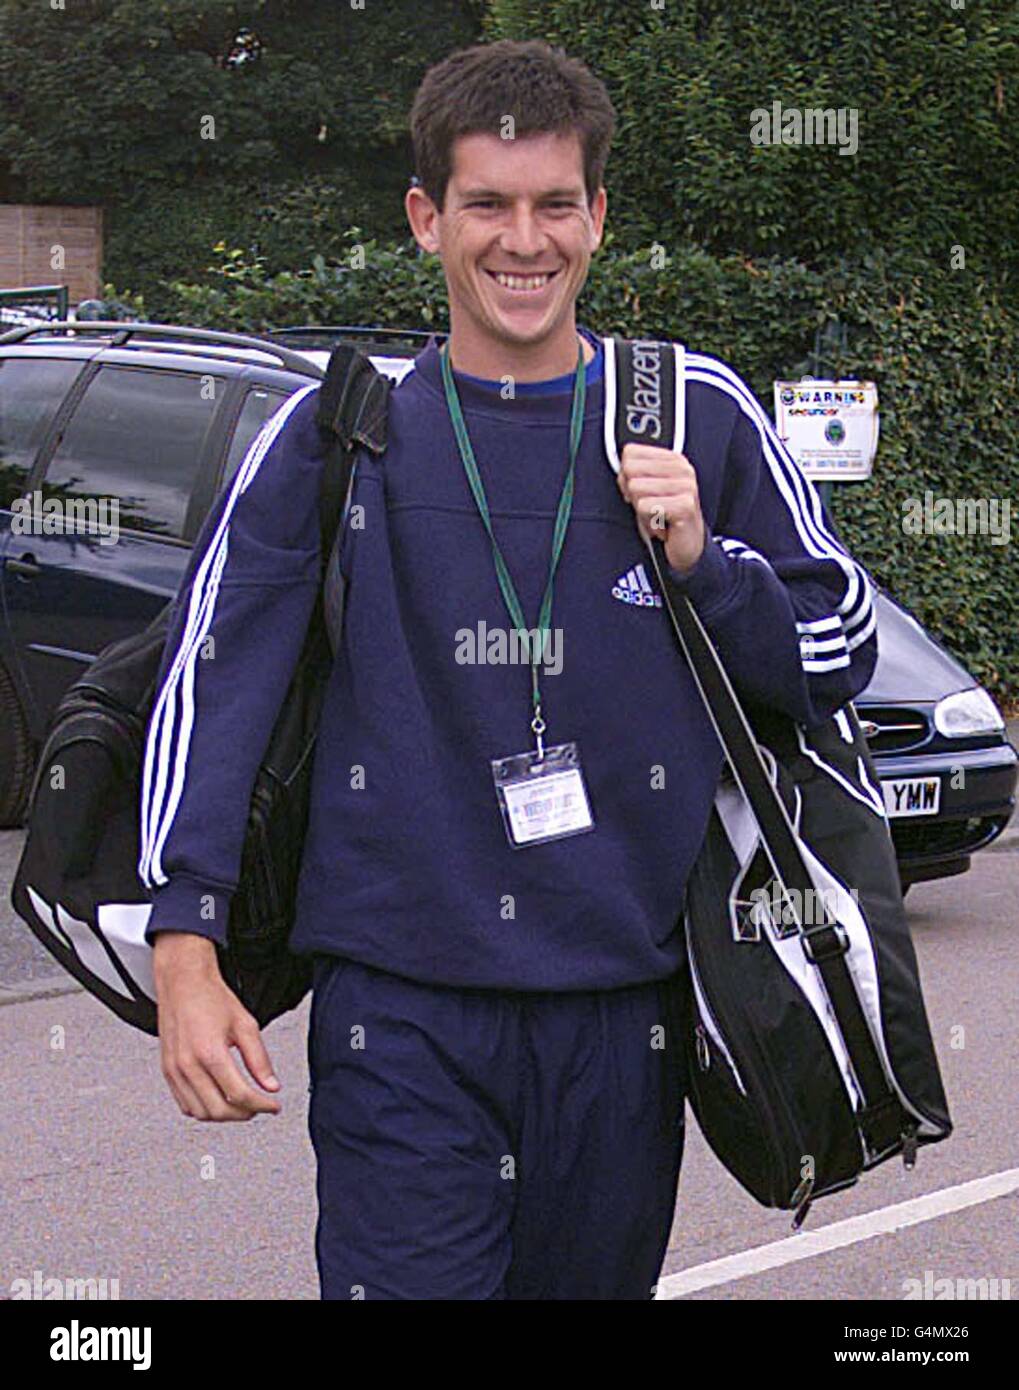 Britain's Tim Henman smiles as he arrives at the Wimbledon Tennis Championships for his match against American Jim Courier. Stock Photo